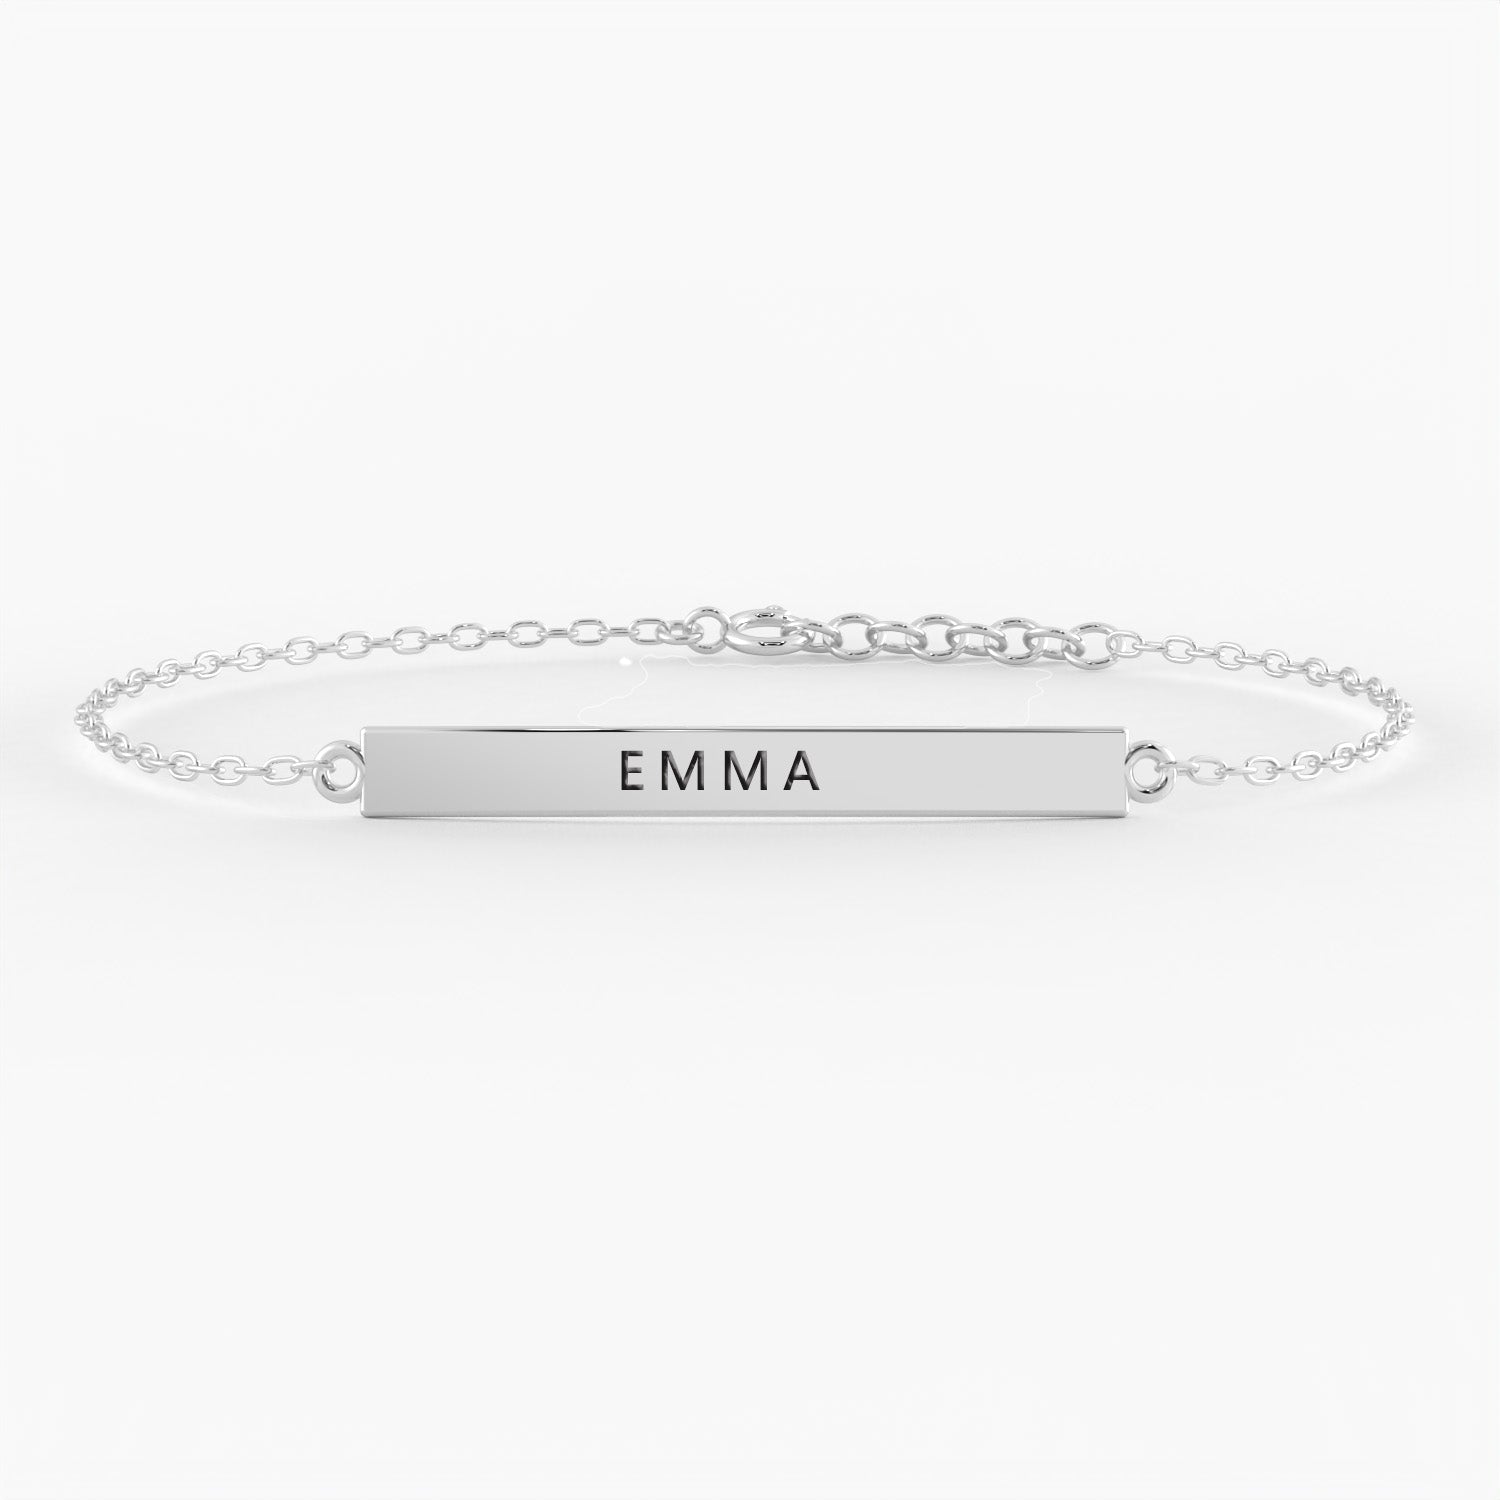 front view of bracelet in silver with emma engraved on it